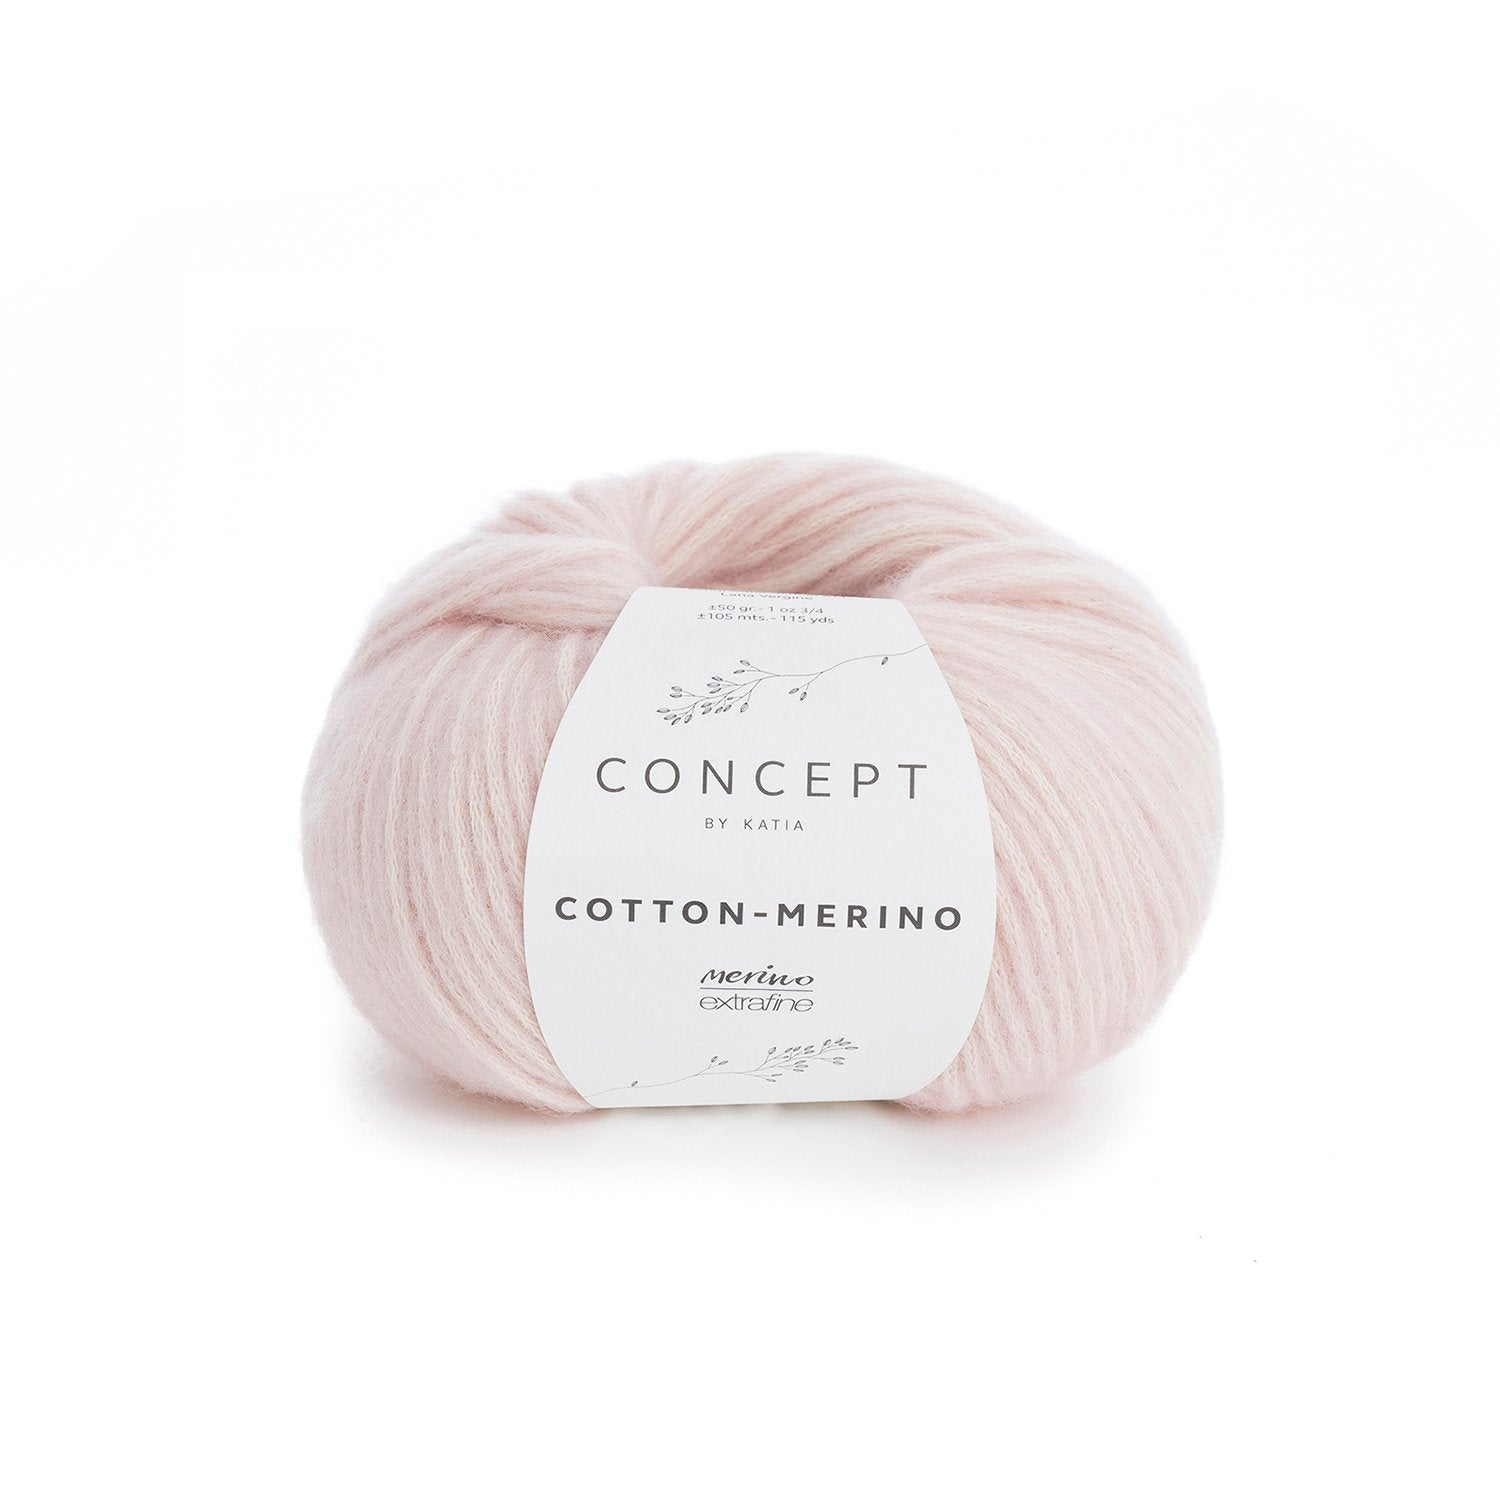 Concept by Katia Cotton-Merino - 103 Pale Pink - 10 Ply - Concept by Katia - The Little Yarn Store